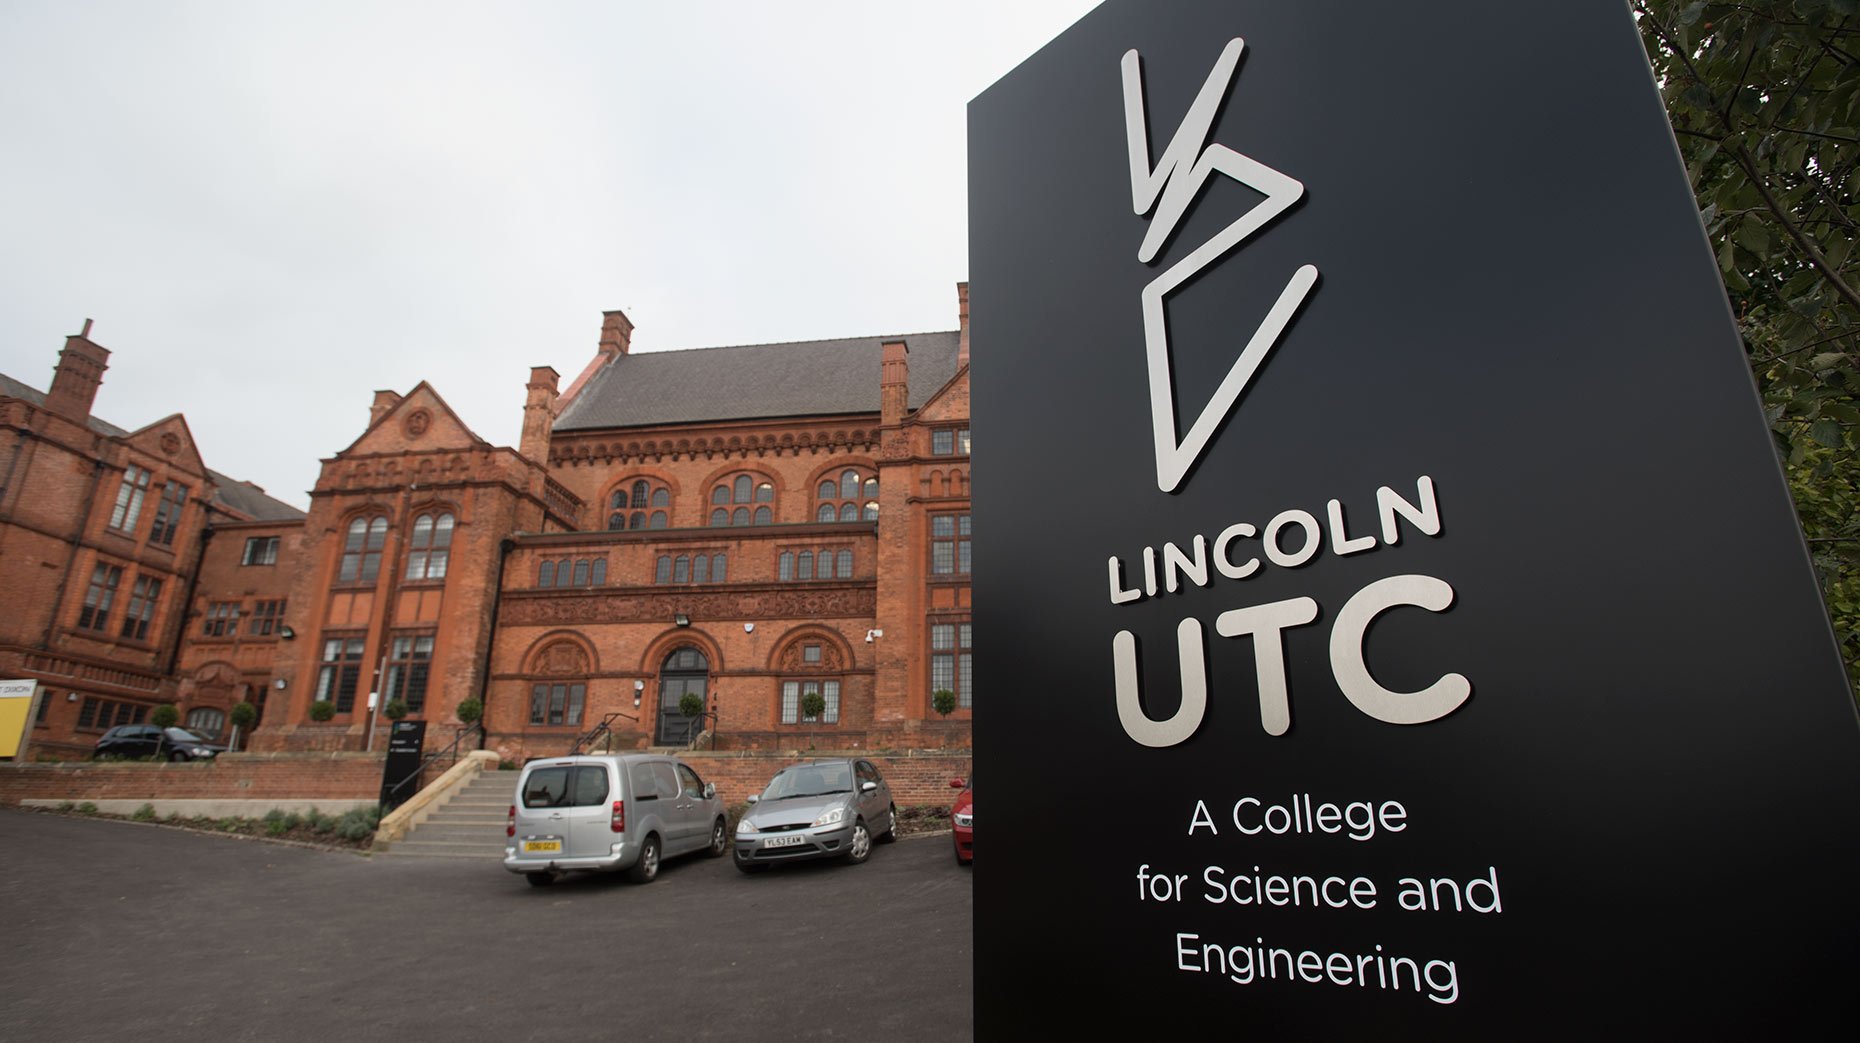 The building has seen a £7.5 million investment and a new three-storey extension. Photo: Steve Smailes for The Lincolnite